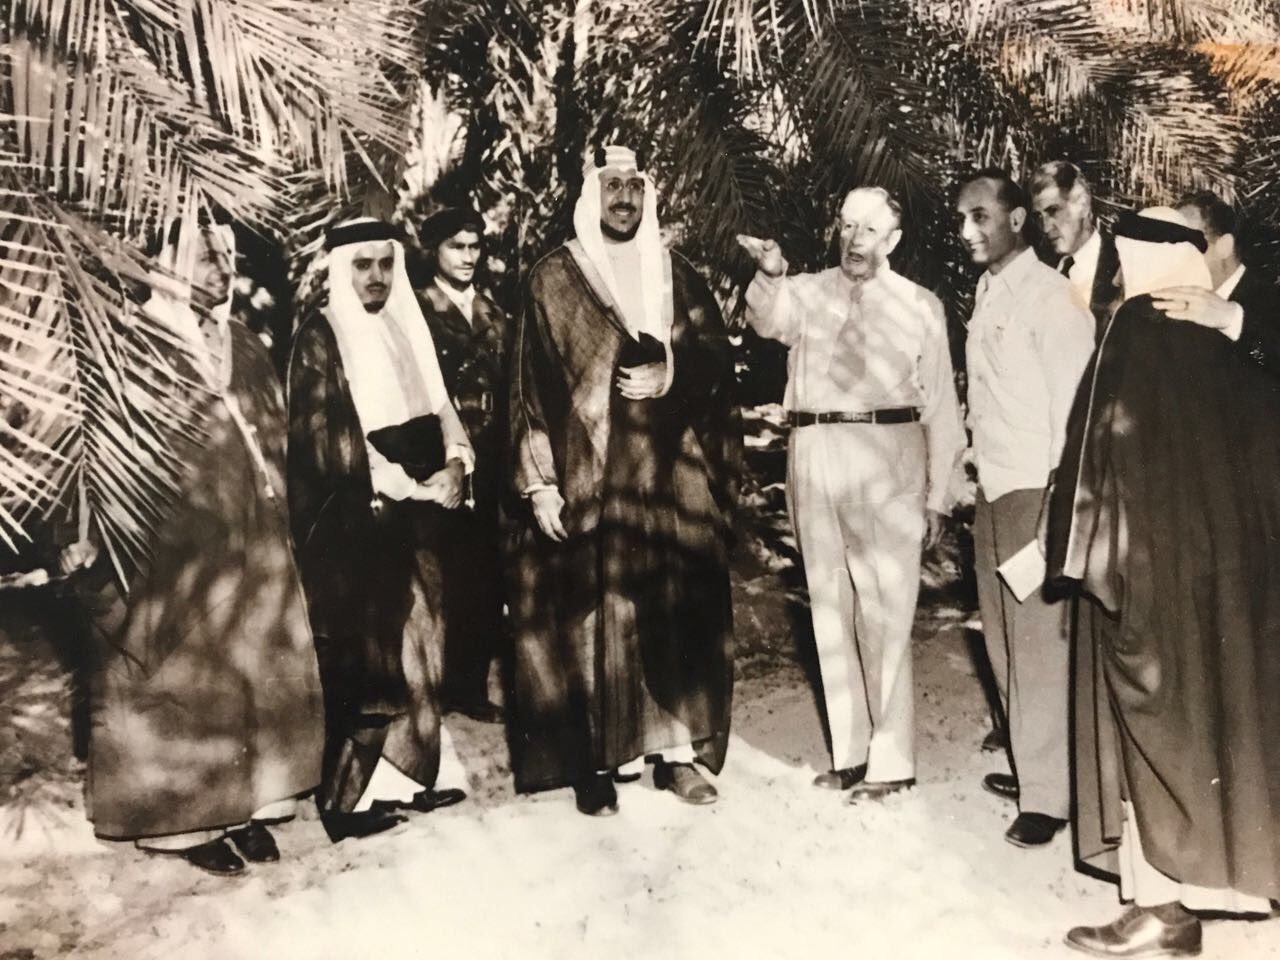 Crown Prince Saud signing his name for children and Mohammed Alireza is seen behind, during the visit to America - 1947